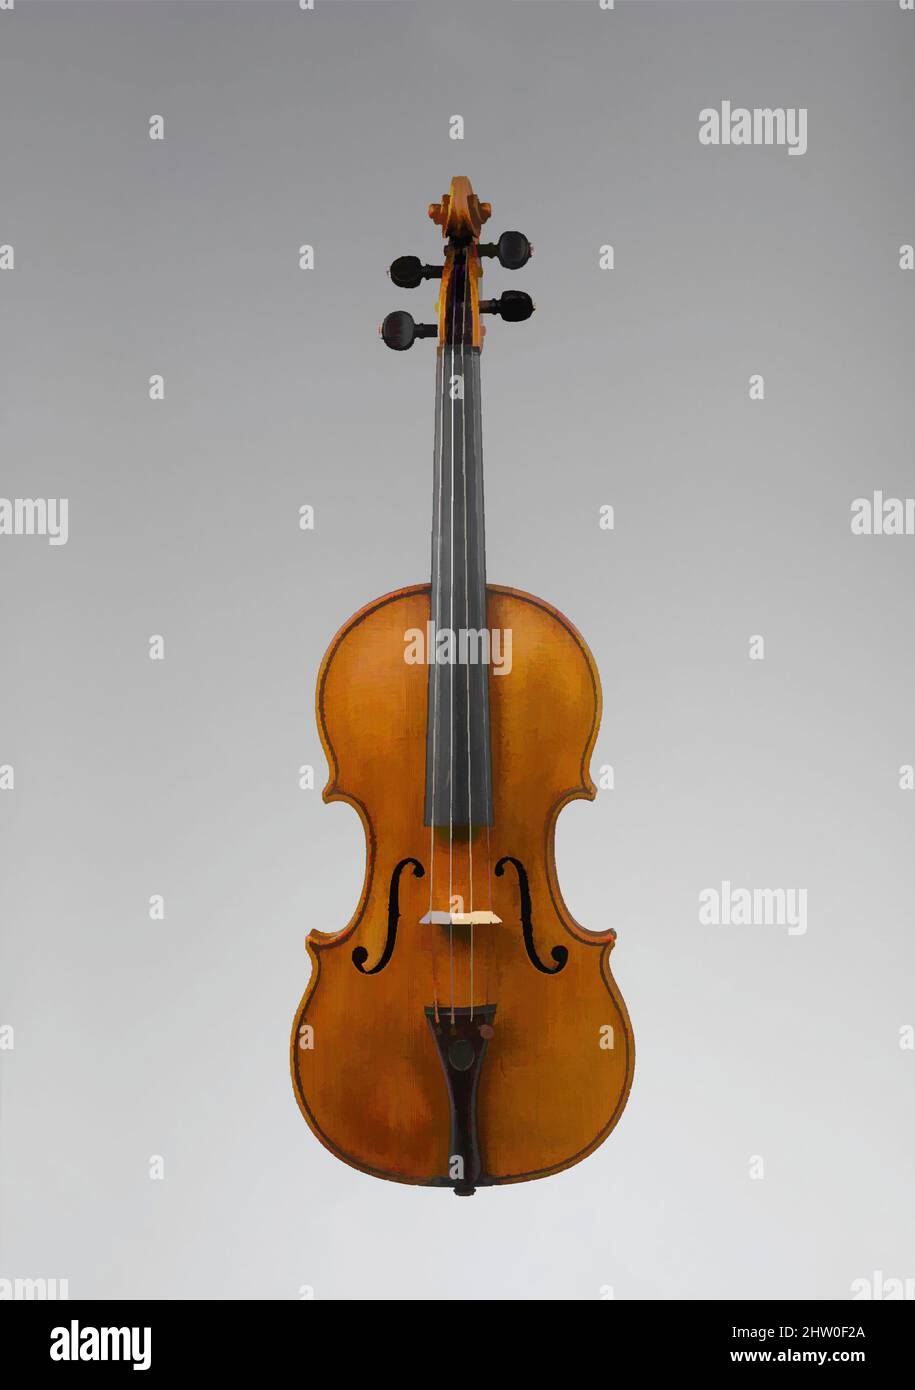 Art inspired by Violin, 1783, Livorno, Italy, Italian, Spruce, maple, ebony, Total L. 33 cm (13 in.); String L. 60 cm (23-5/8 in.), Chordophone-Lute-bowed-unfretted, Antonio Gragnani (Italian, Livorno active 1765–1795, Classic works modernized by Artotop with a splash of modernity. Shapes, color and value, eye-catching visual impact on art. Emotions through freedom of artworks in a contemporary way. A timeless message pursuing a wildly creative new direction. Artists turning to the digital medium and creating the Artotop NFT Stock Photo